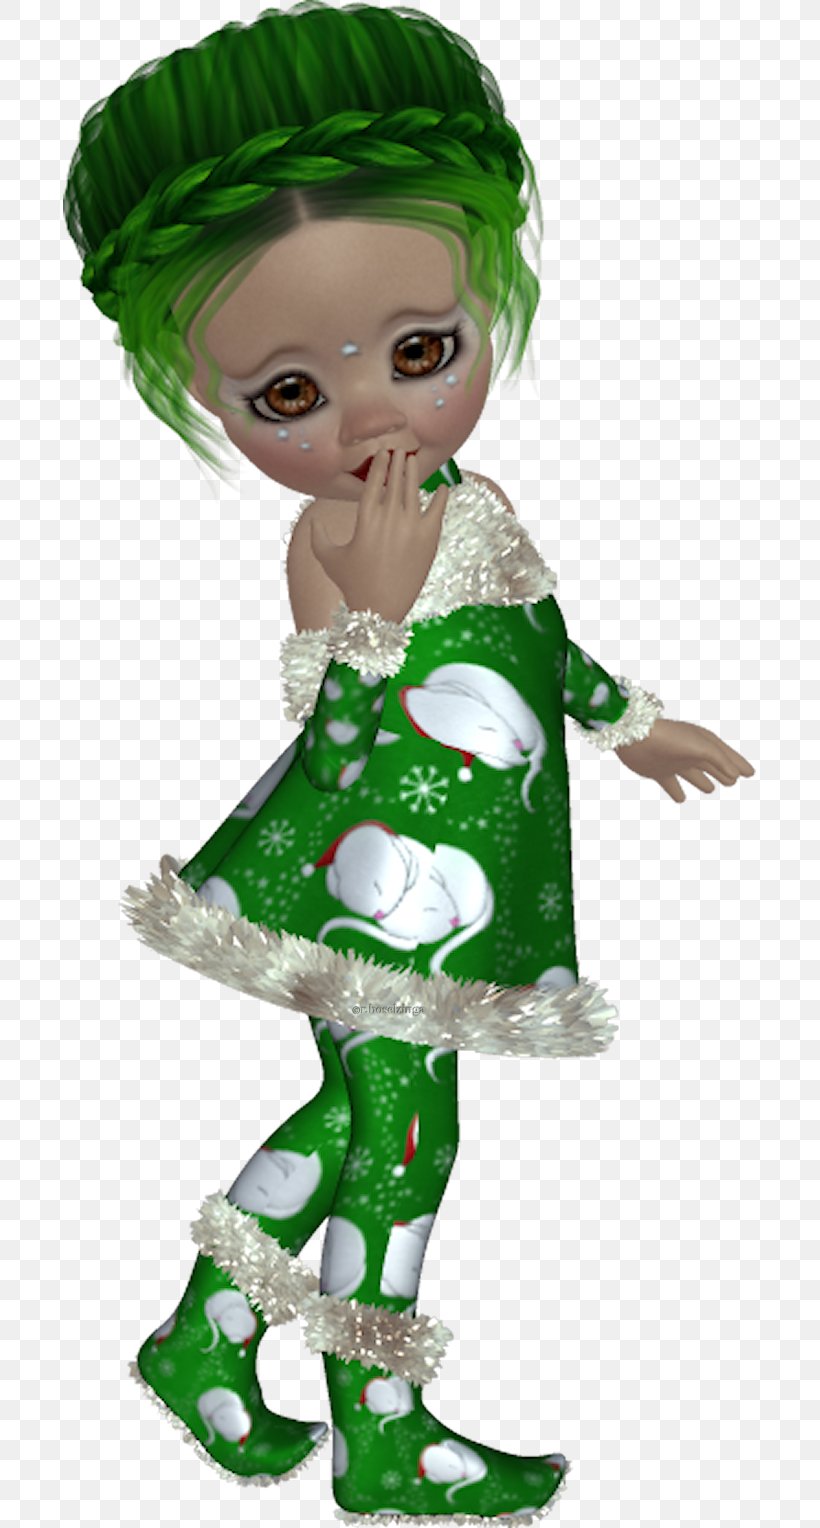 Christmas Ornament Green Doll Toddler, PNG, 693x1528px, Christmas Ornament, Christmas, Christmas Decoration, Doll, Fictional Character Download Free